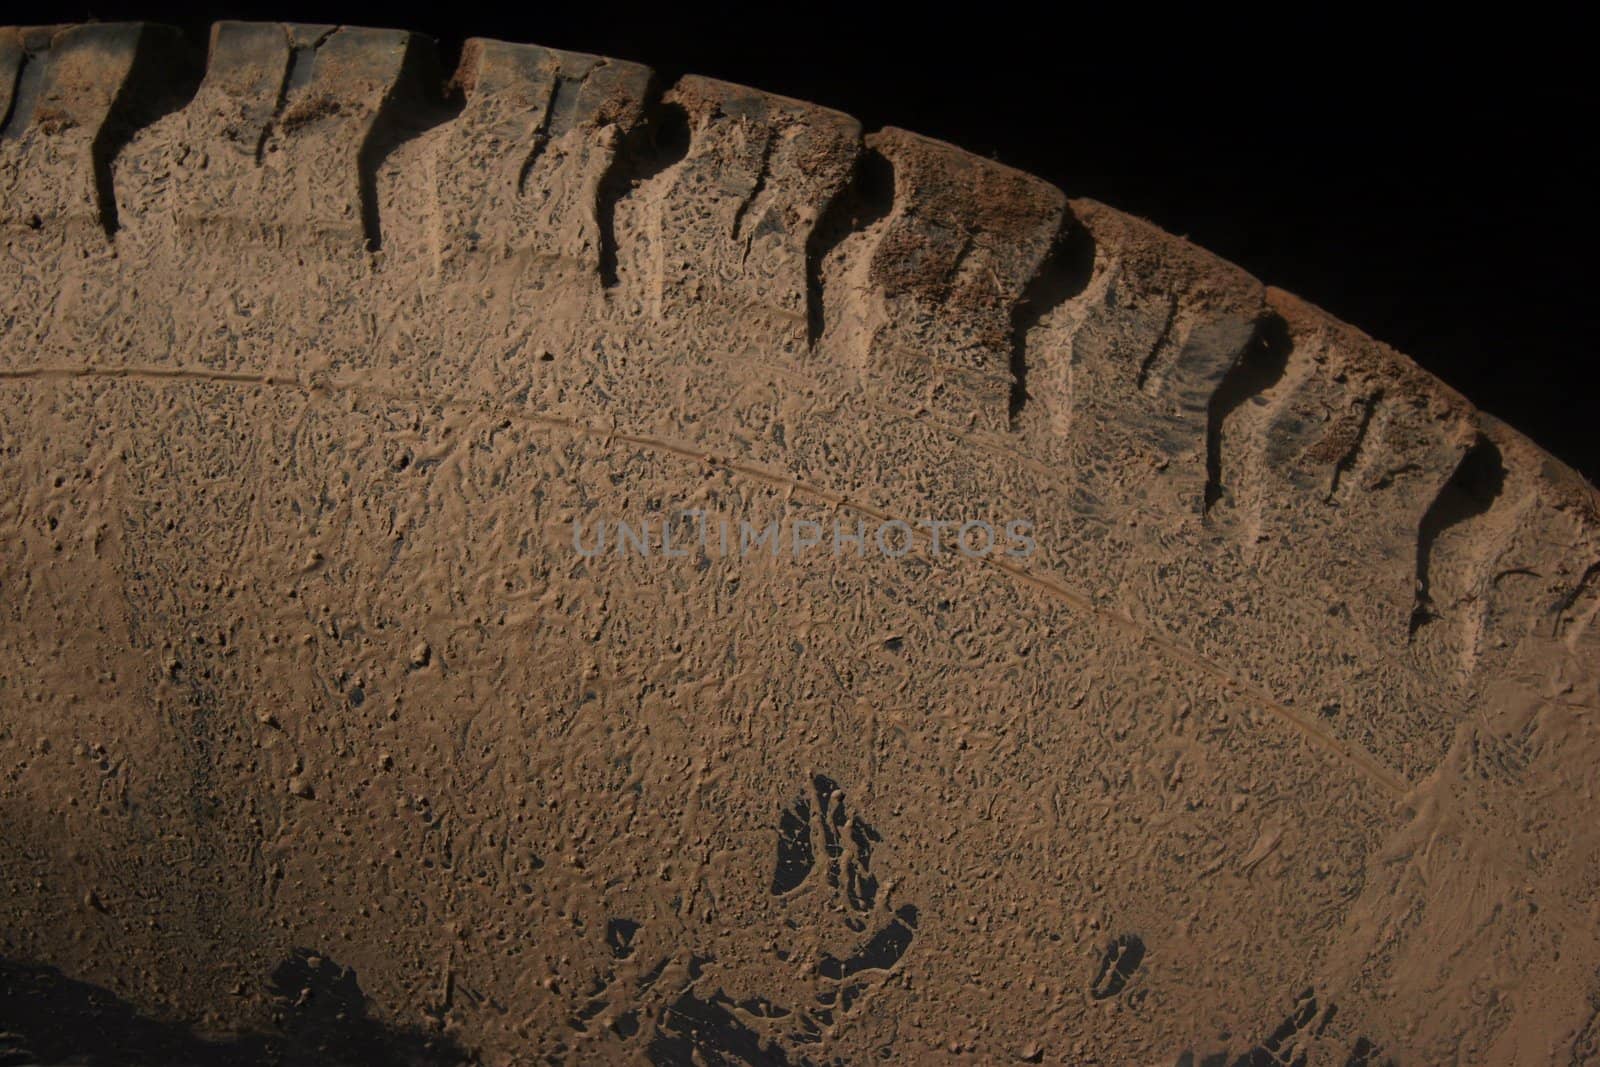 Car tire covered in dirt and mud after driving offroads